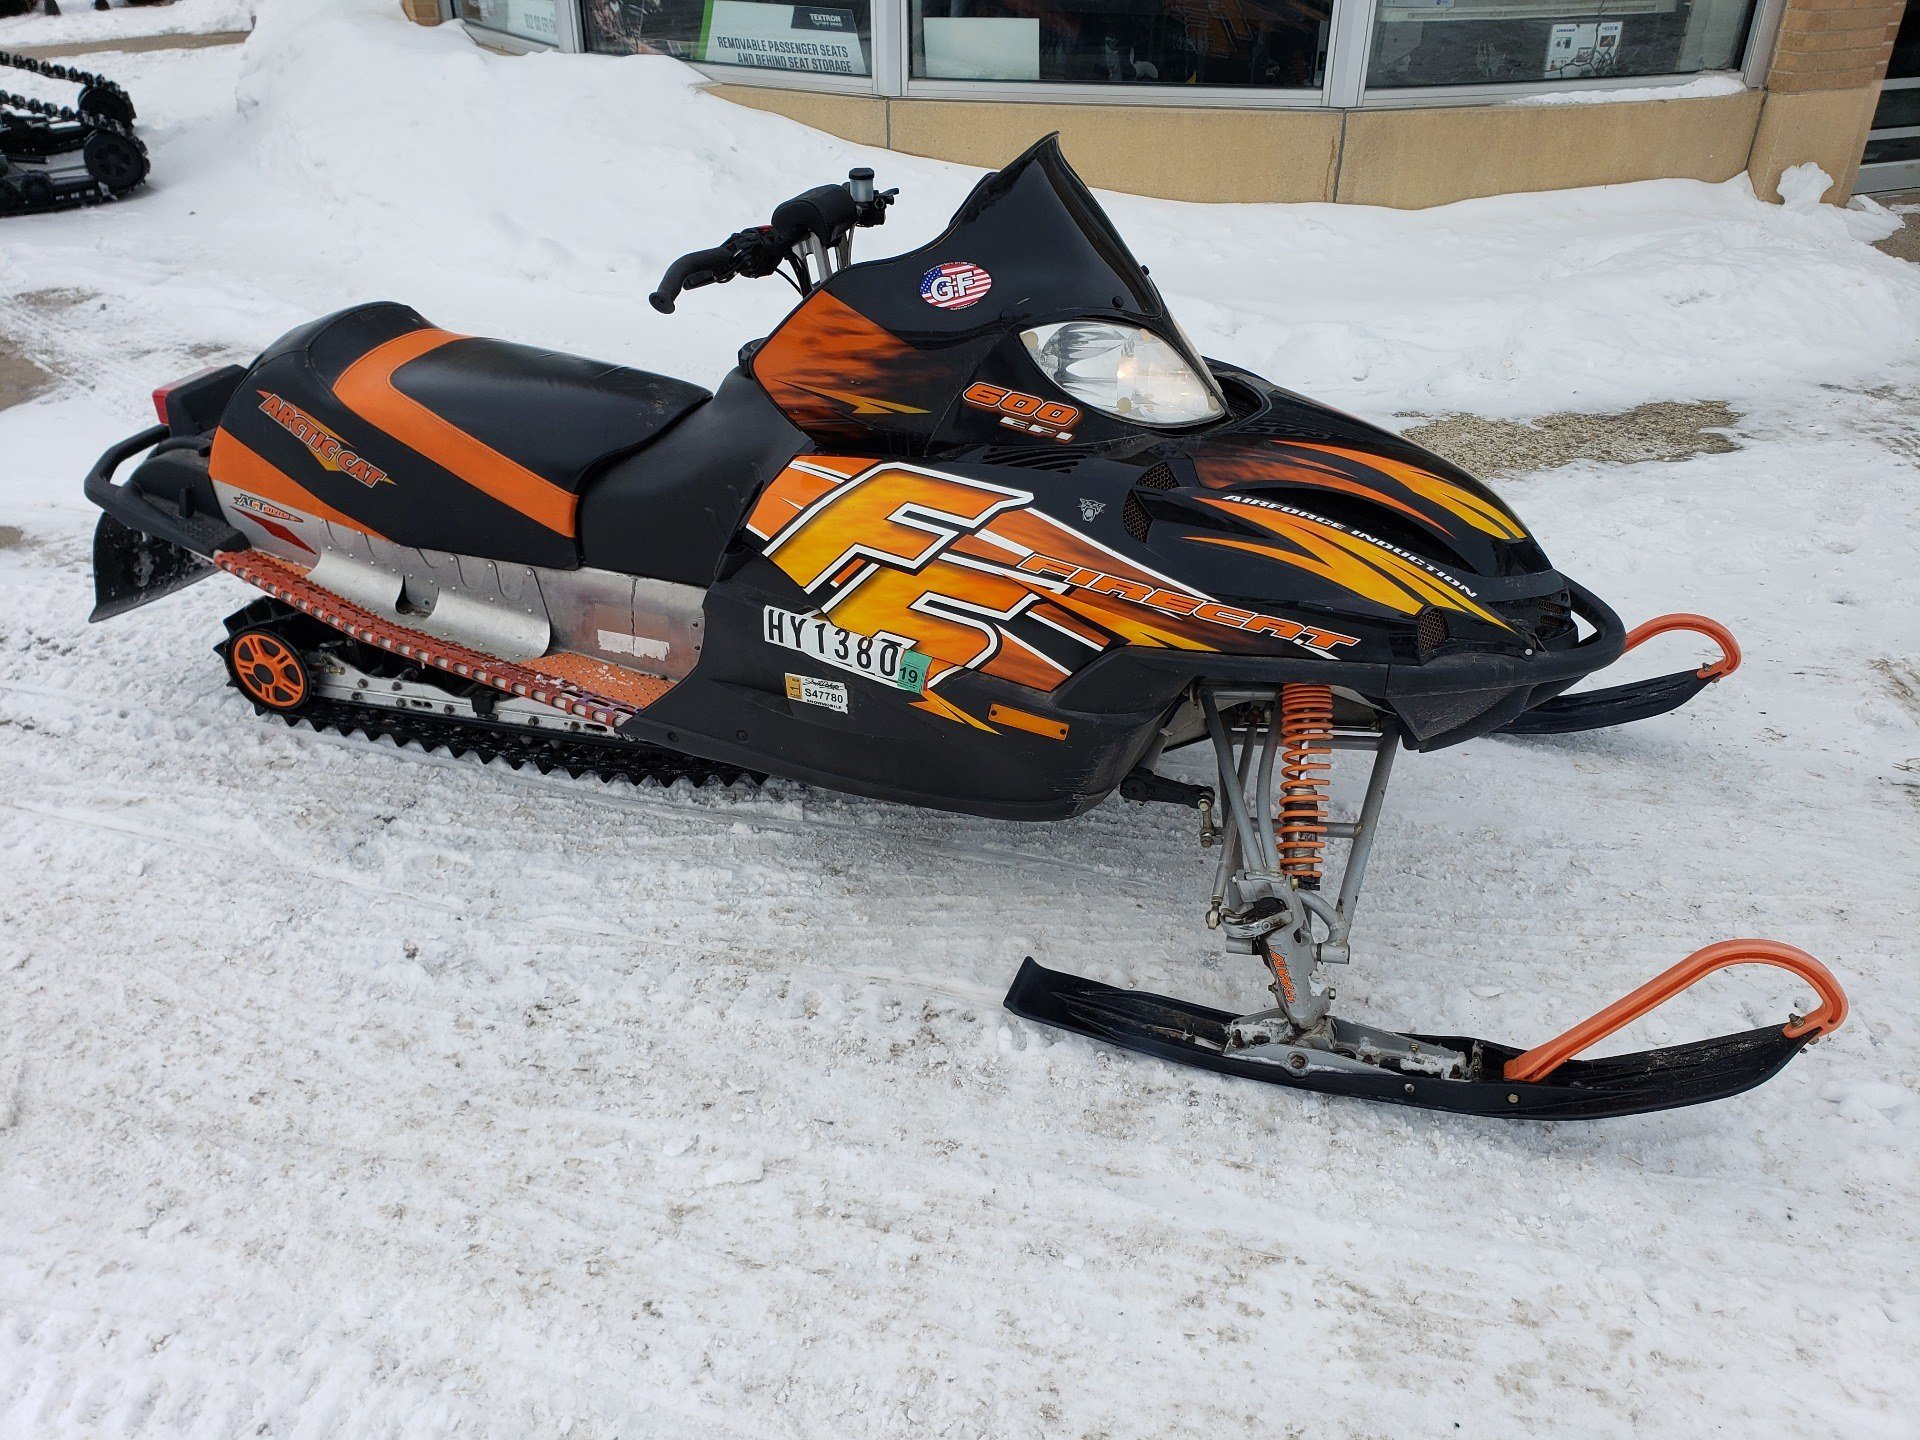 2000 Polaris Xc 600 Deluxe Snowmobile Sports Car Wanted Ads